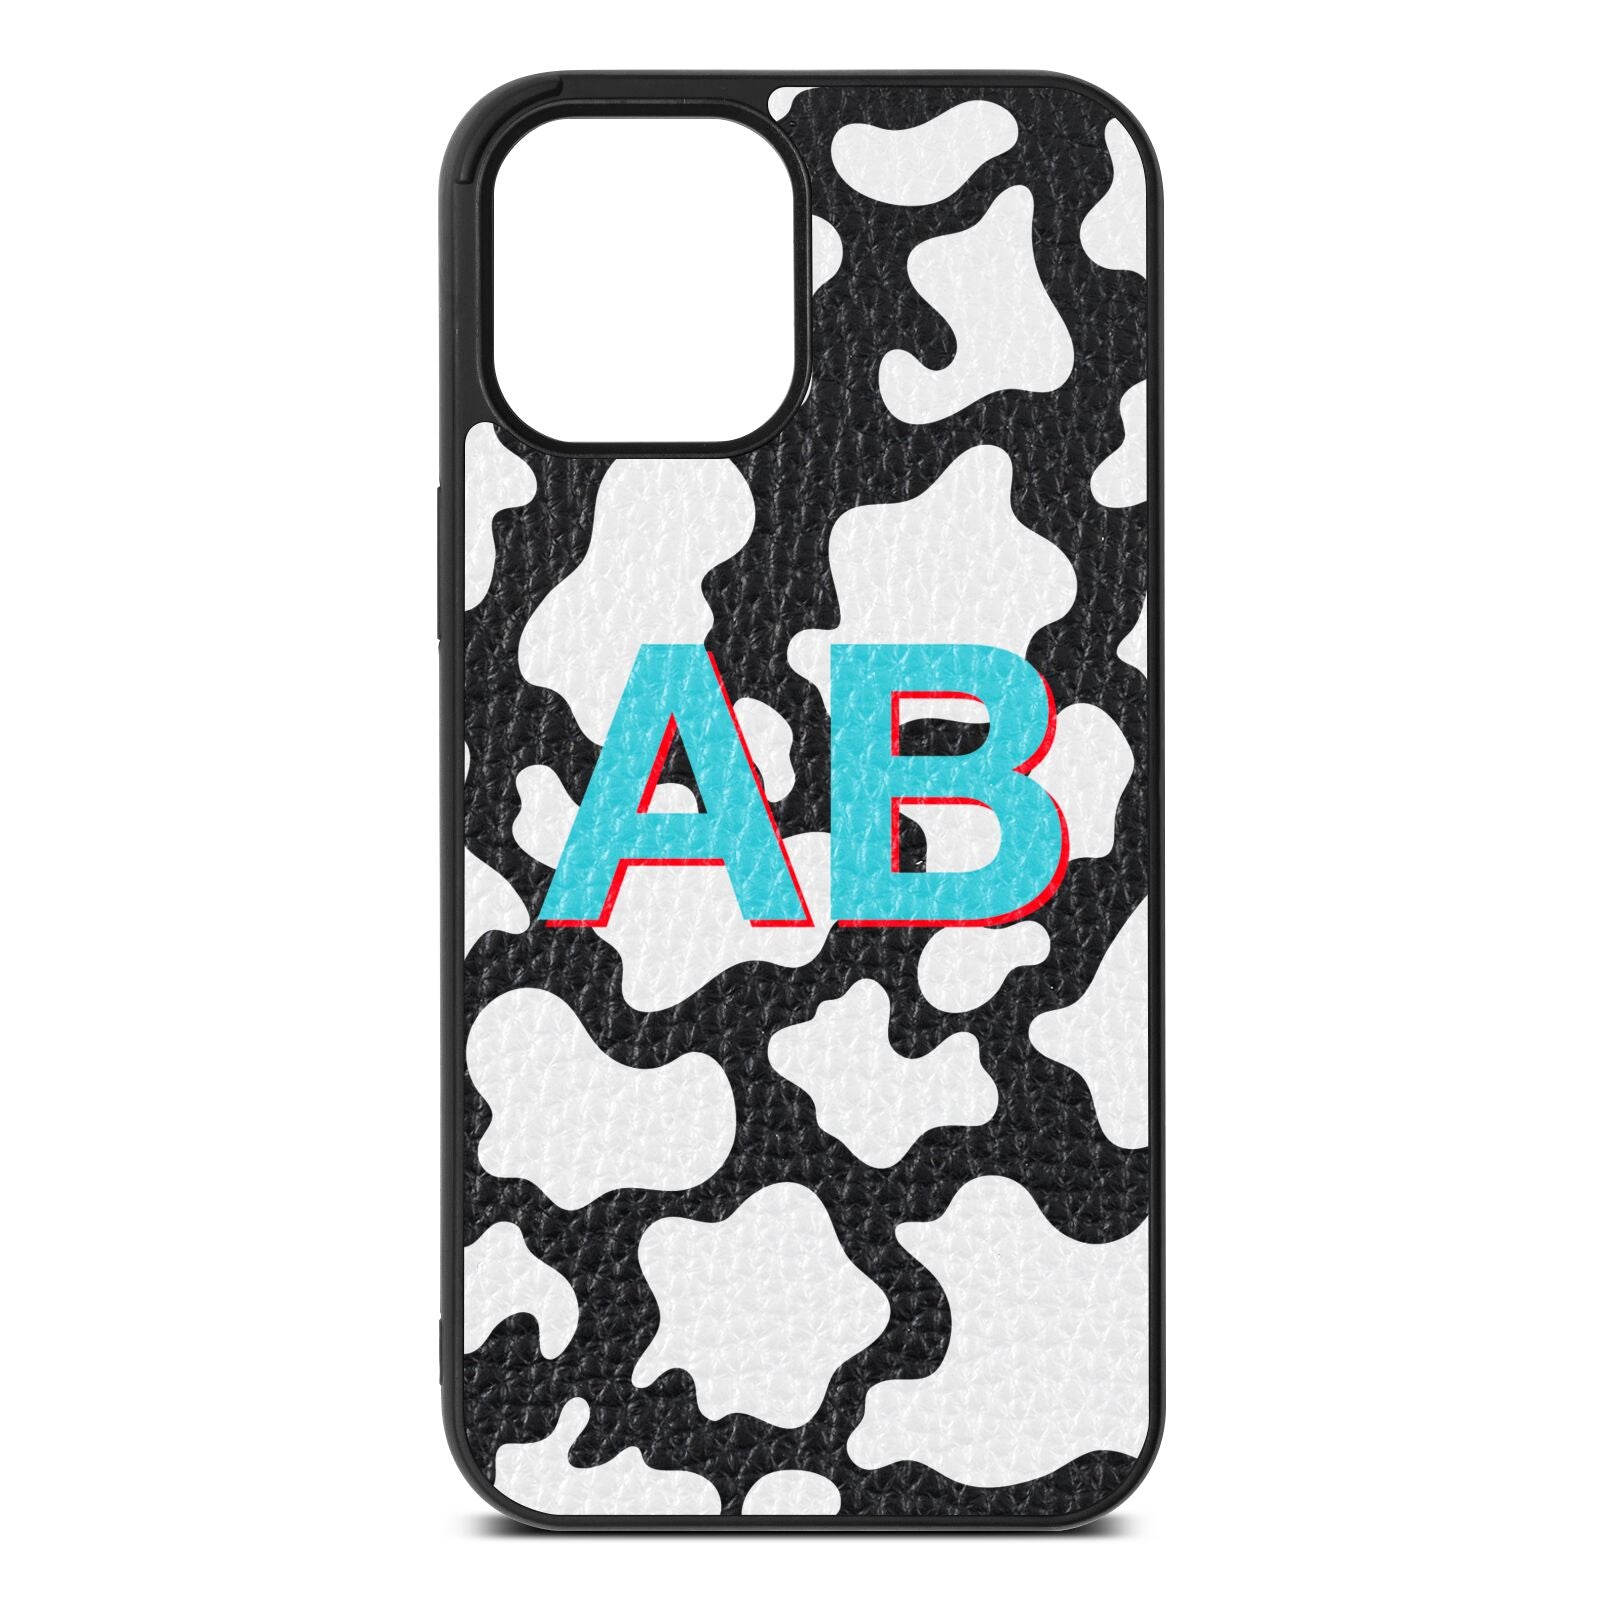 Personalised Cow Print Black Pebble Leather iPhone 12 Pro Max Case